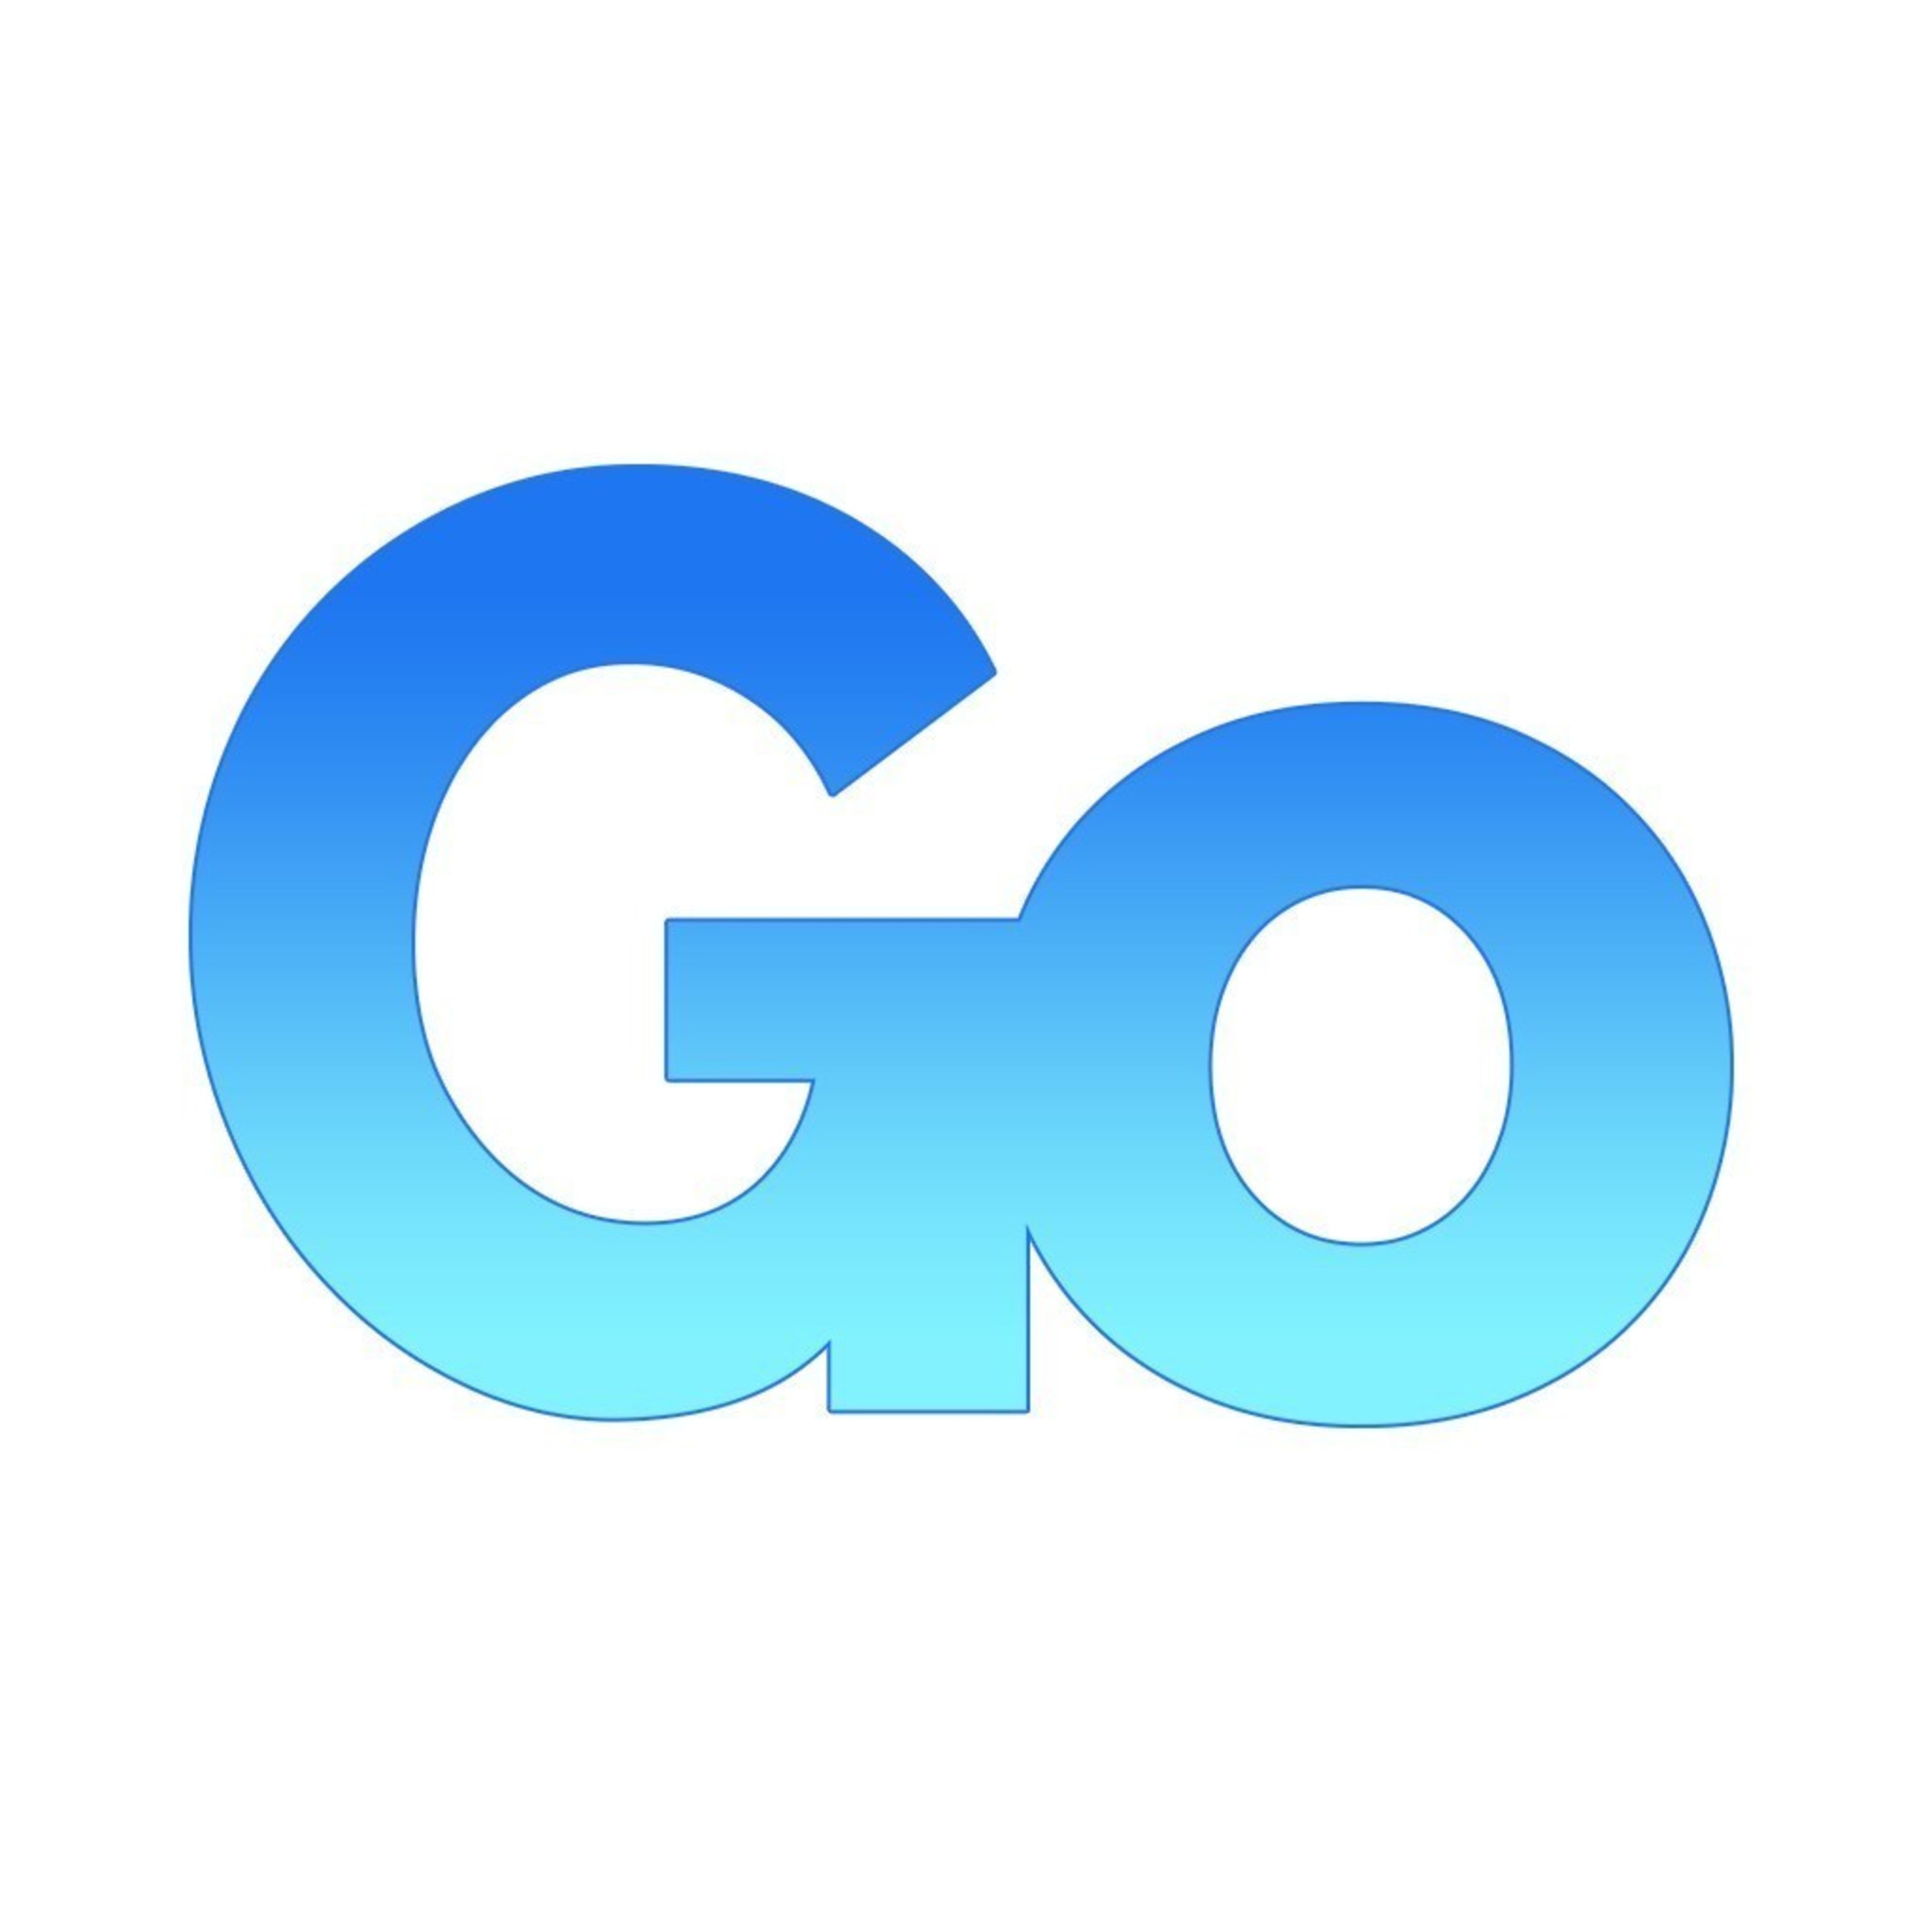 Go Launches World's First App That Allows You To Shop & Pay For Car